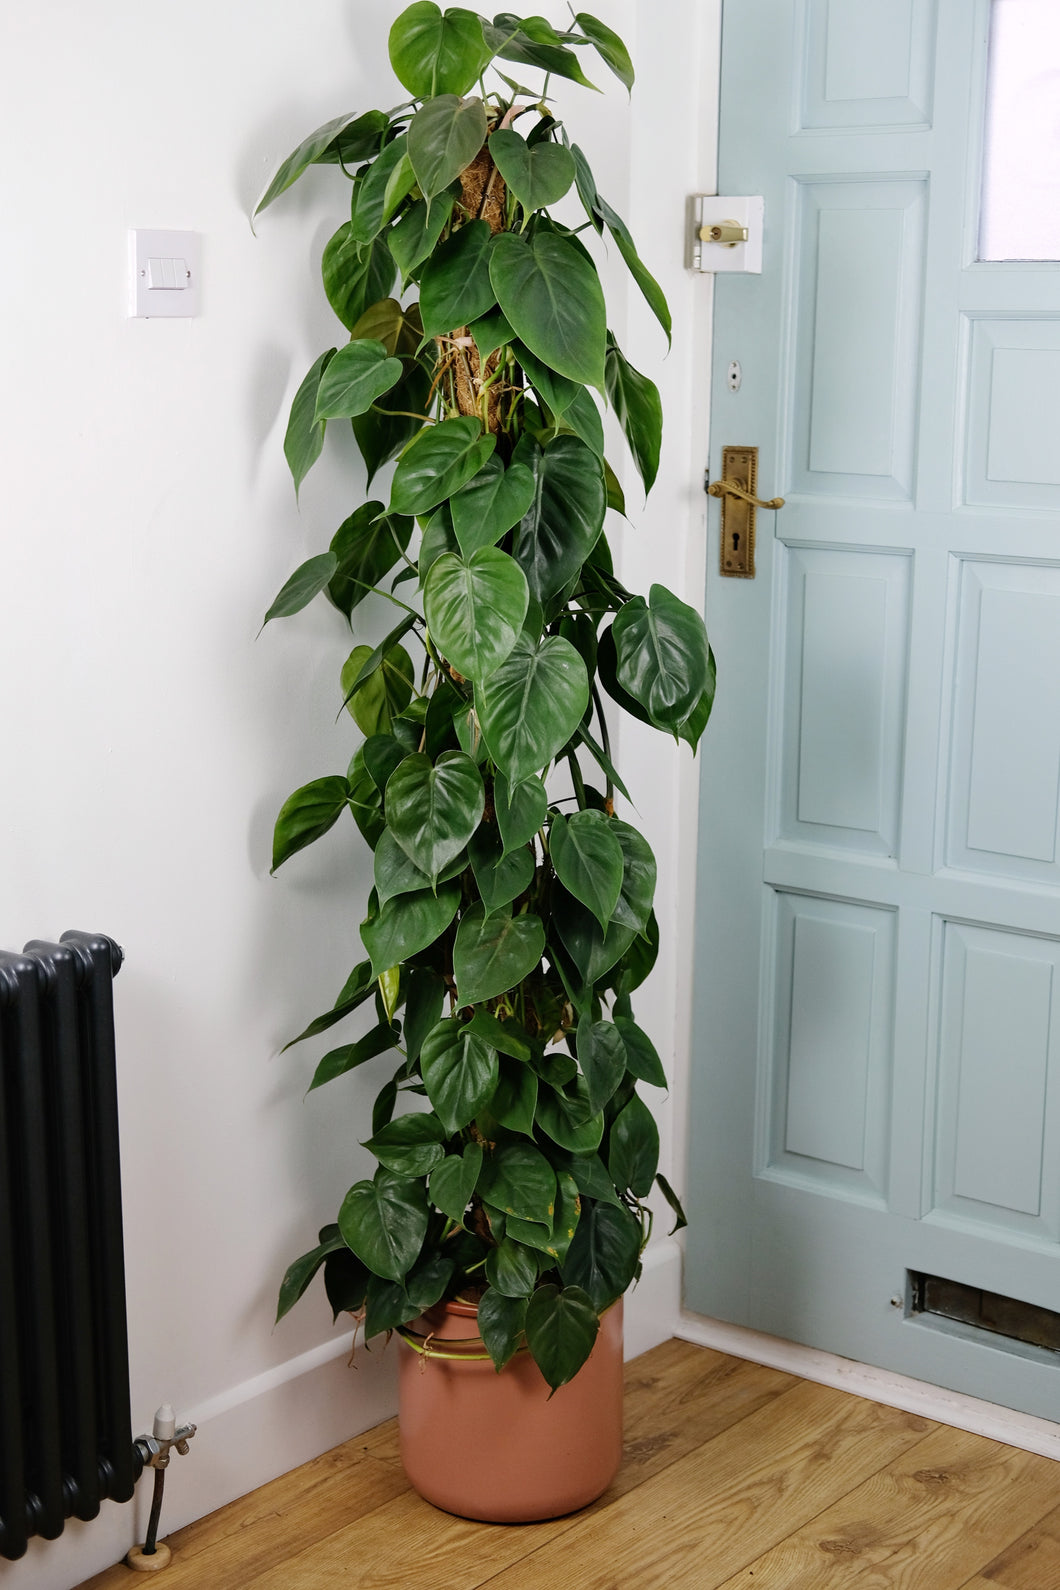 Philodendron Scandens on Moss Pole | Heart Leaf Vine on Moss Pole